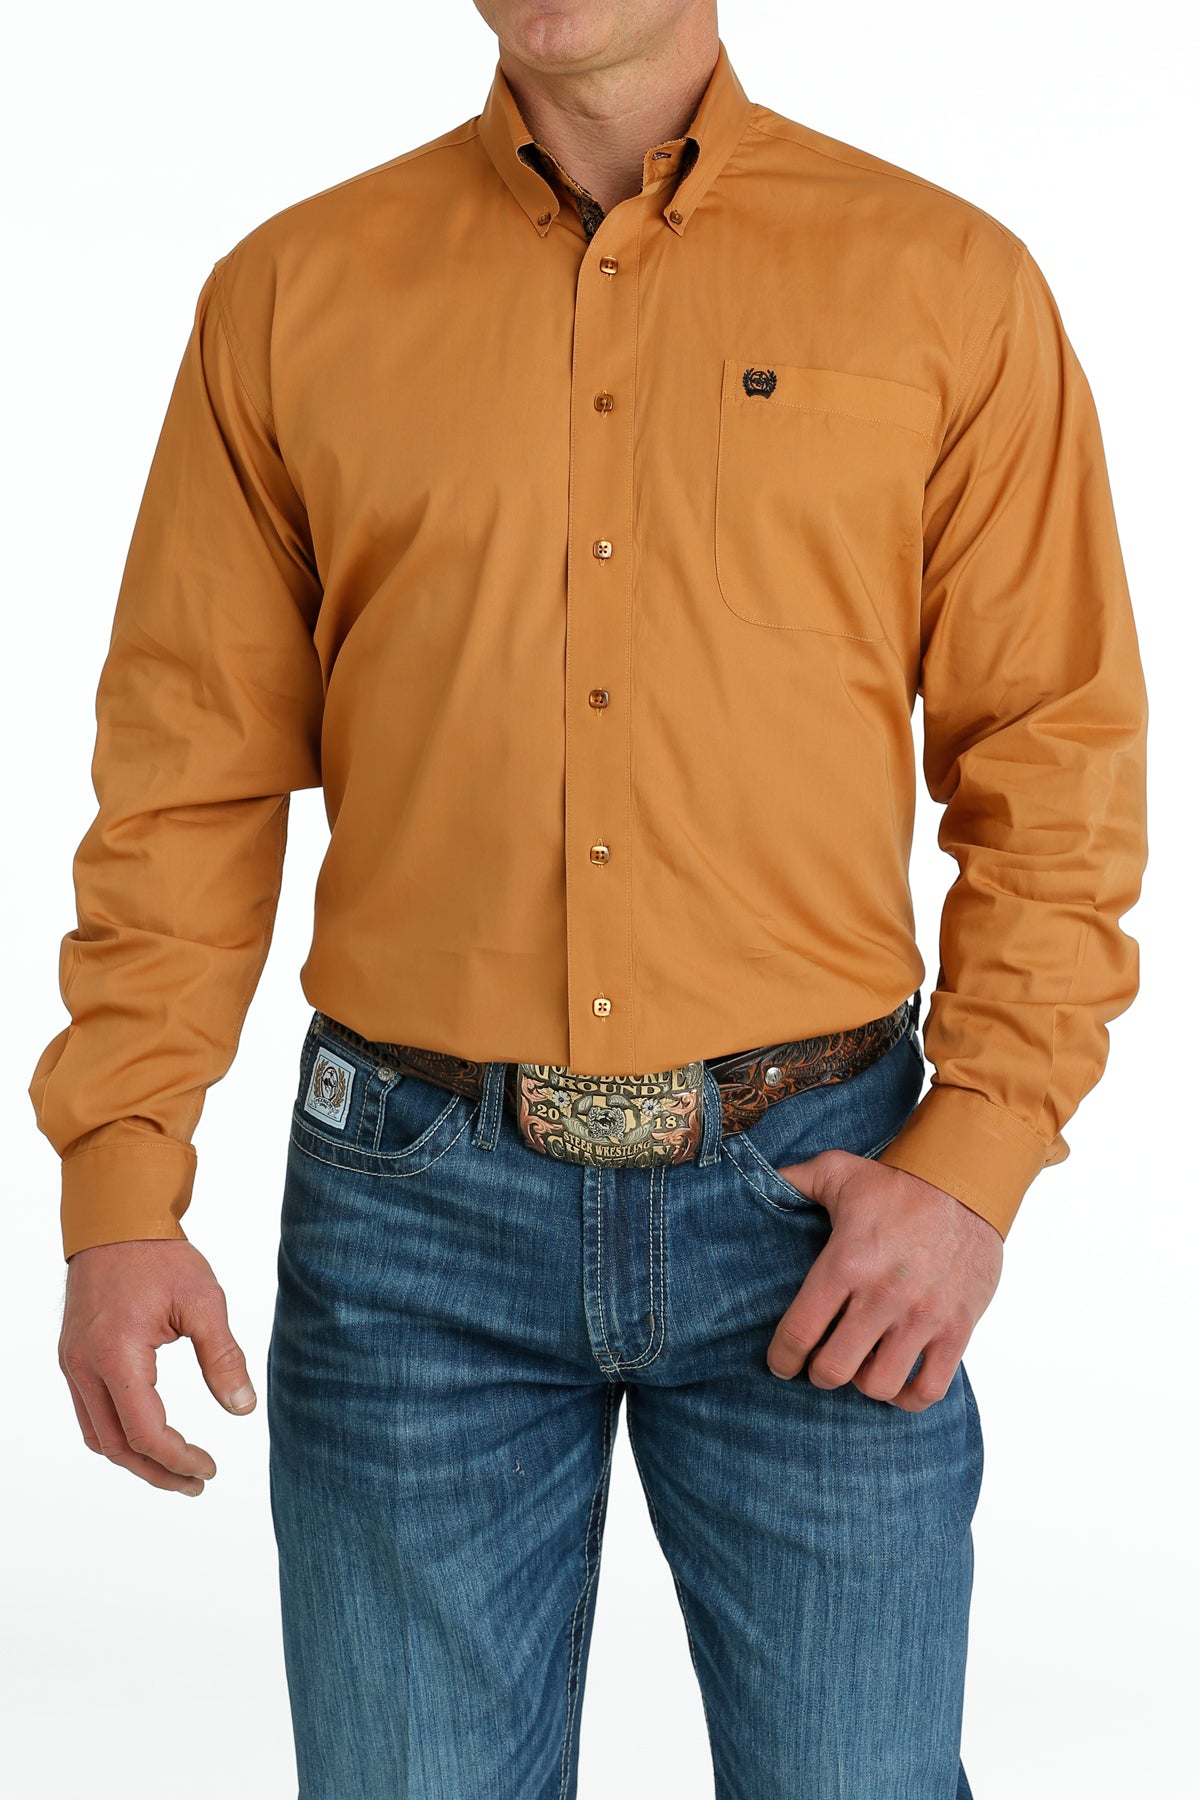 Cinch Men's Classic Fit Solid Gold Western Button Down Shirt